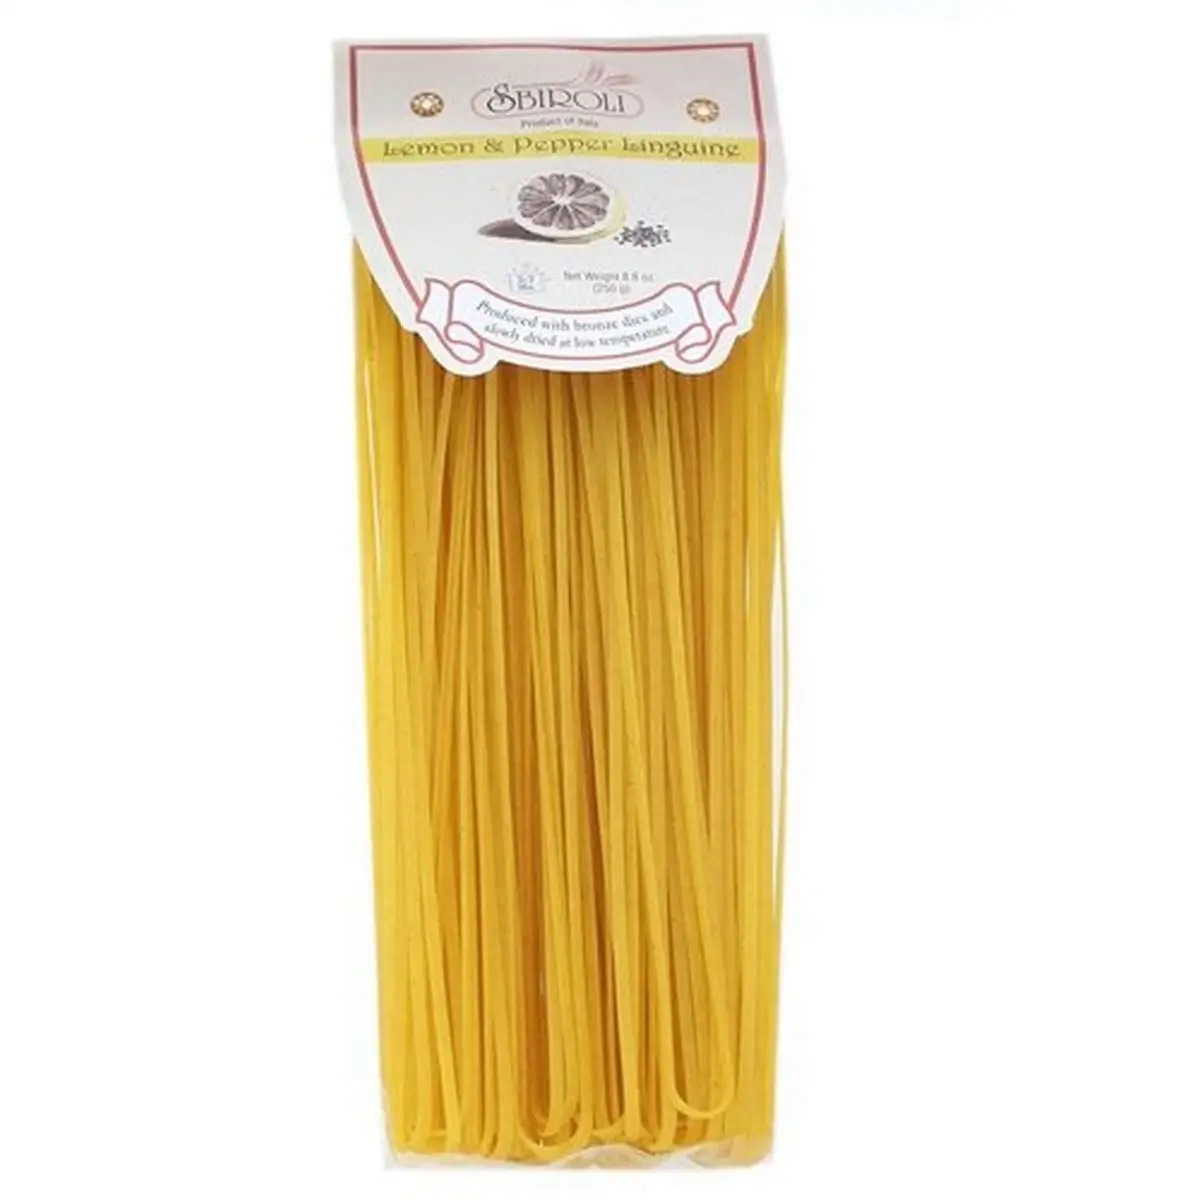 Long Pasta Best quality in Europe Special Price / Free Samples / Spagetti- Pastas